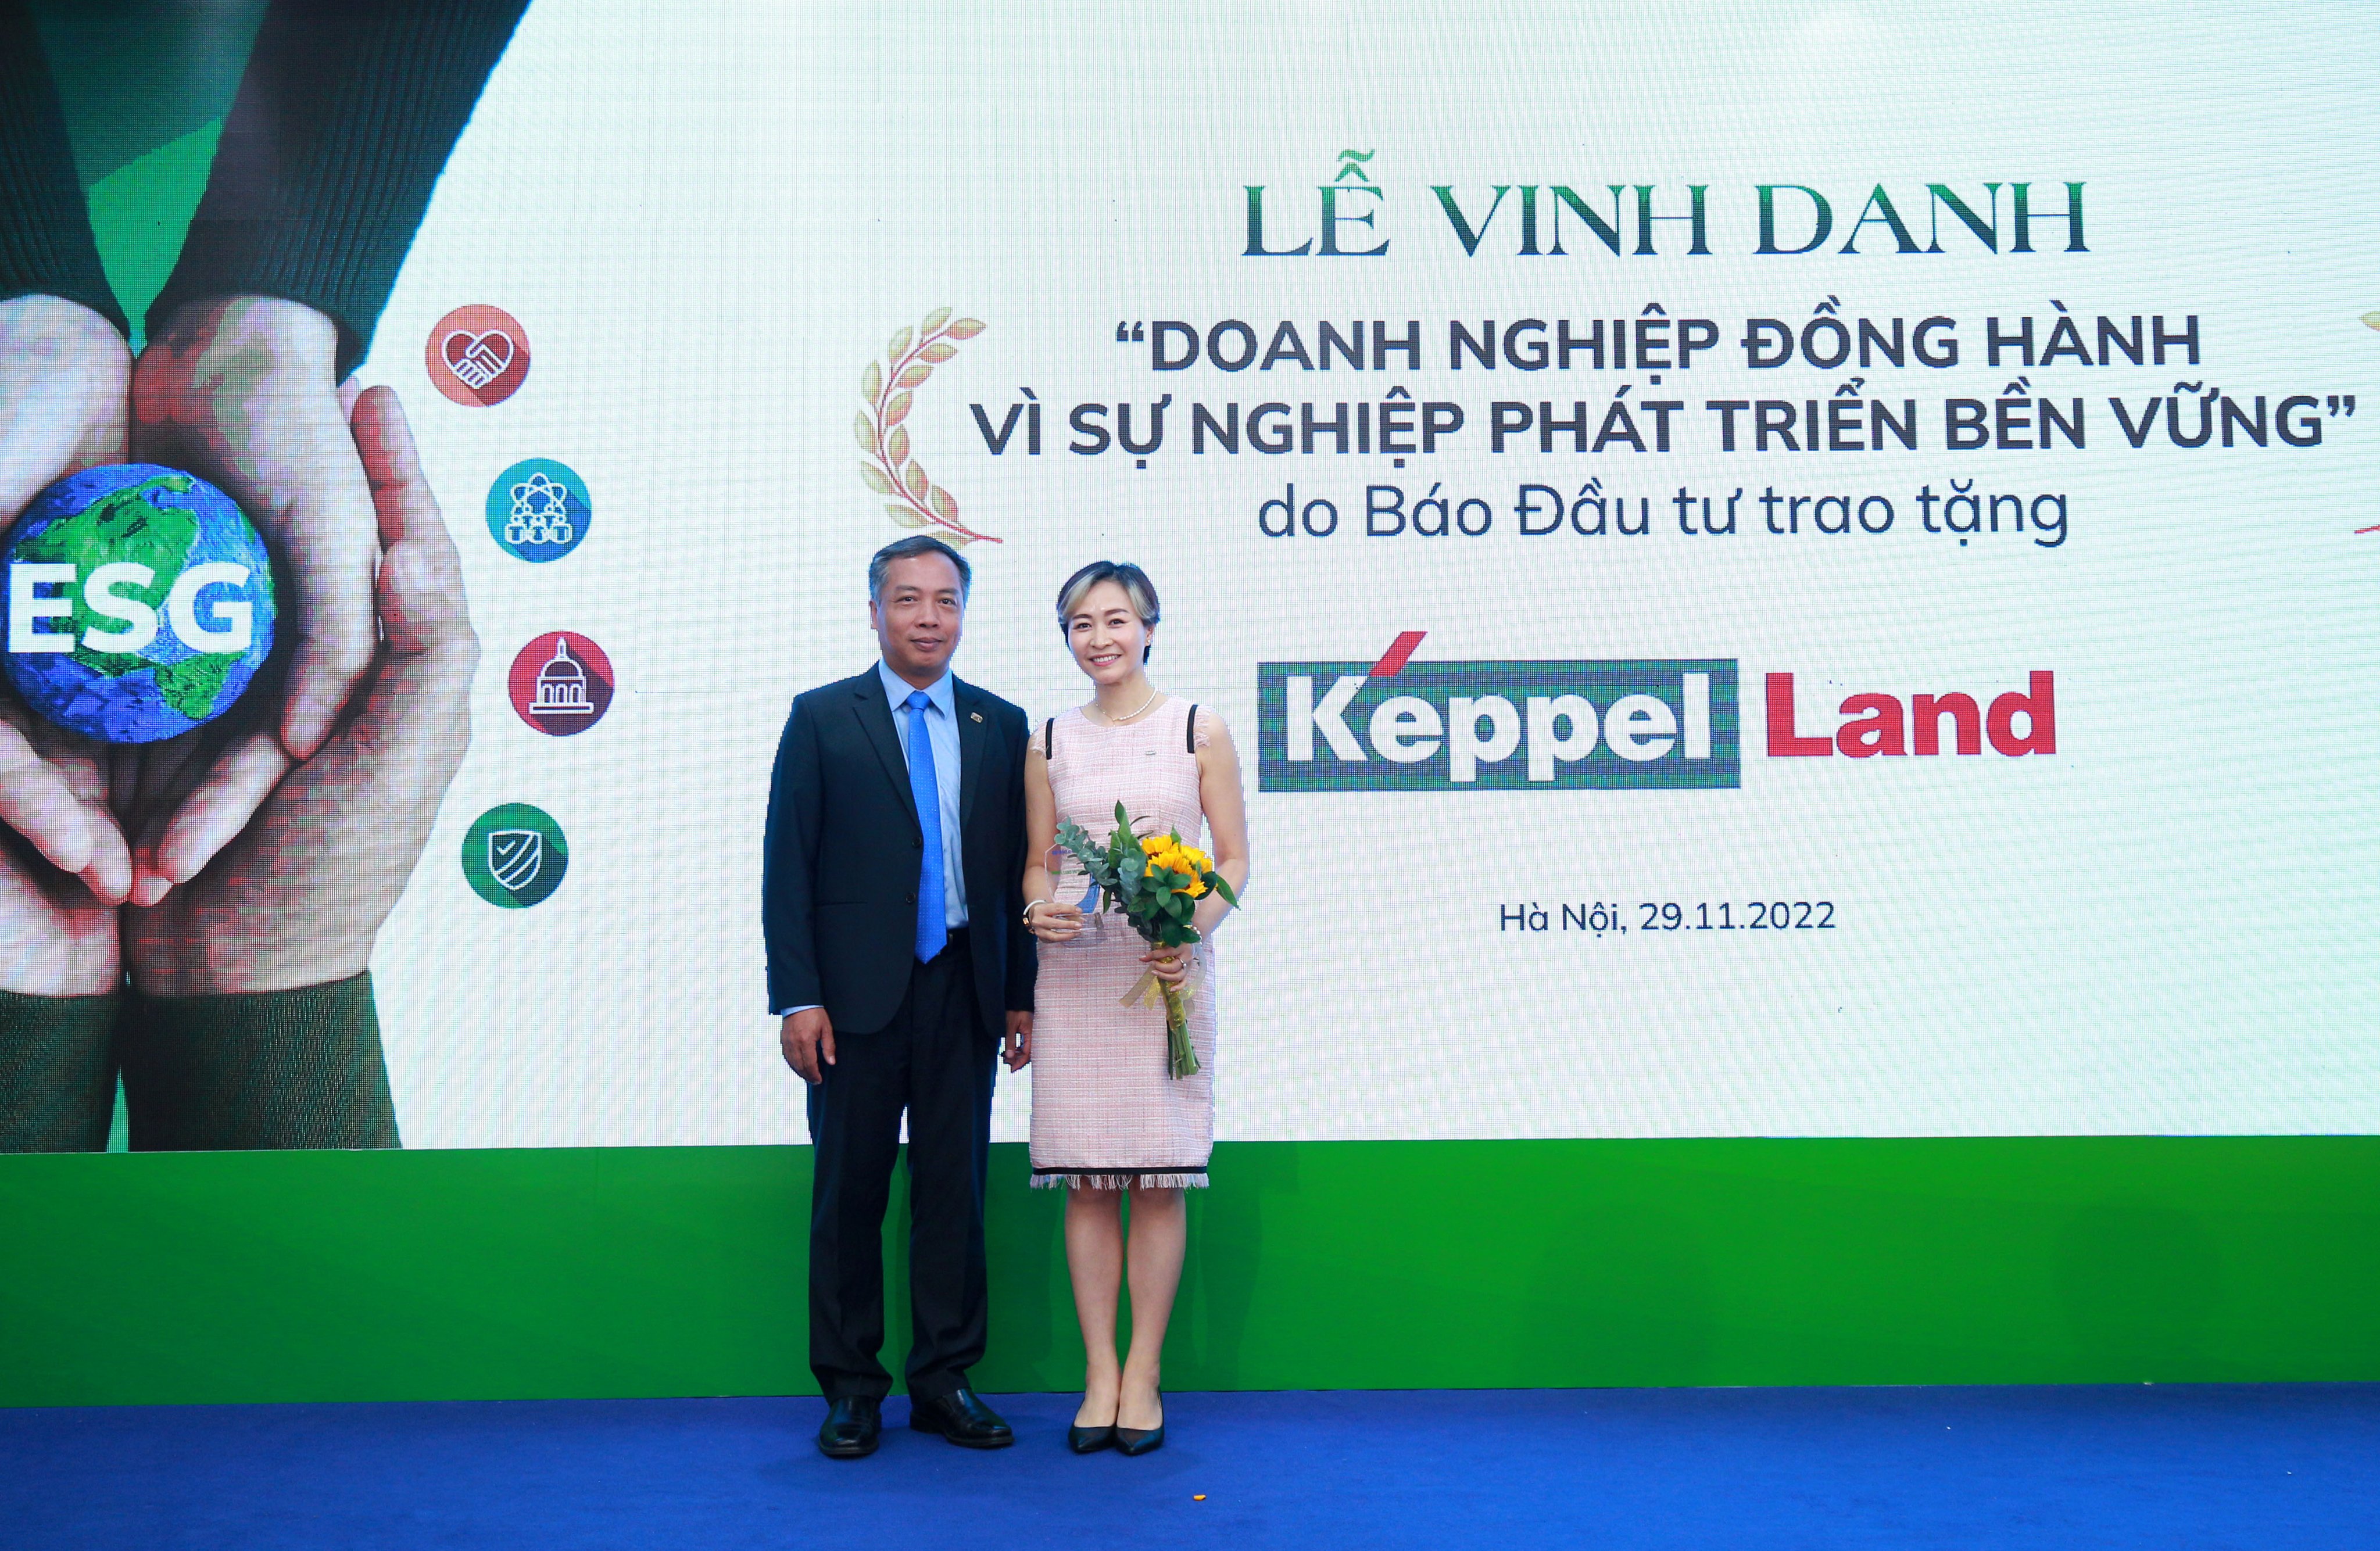 Keppel Land recognised at Vietnam Investment Review’s Sustainable Development Conference 